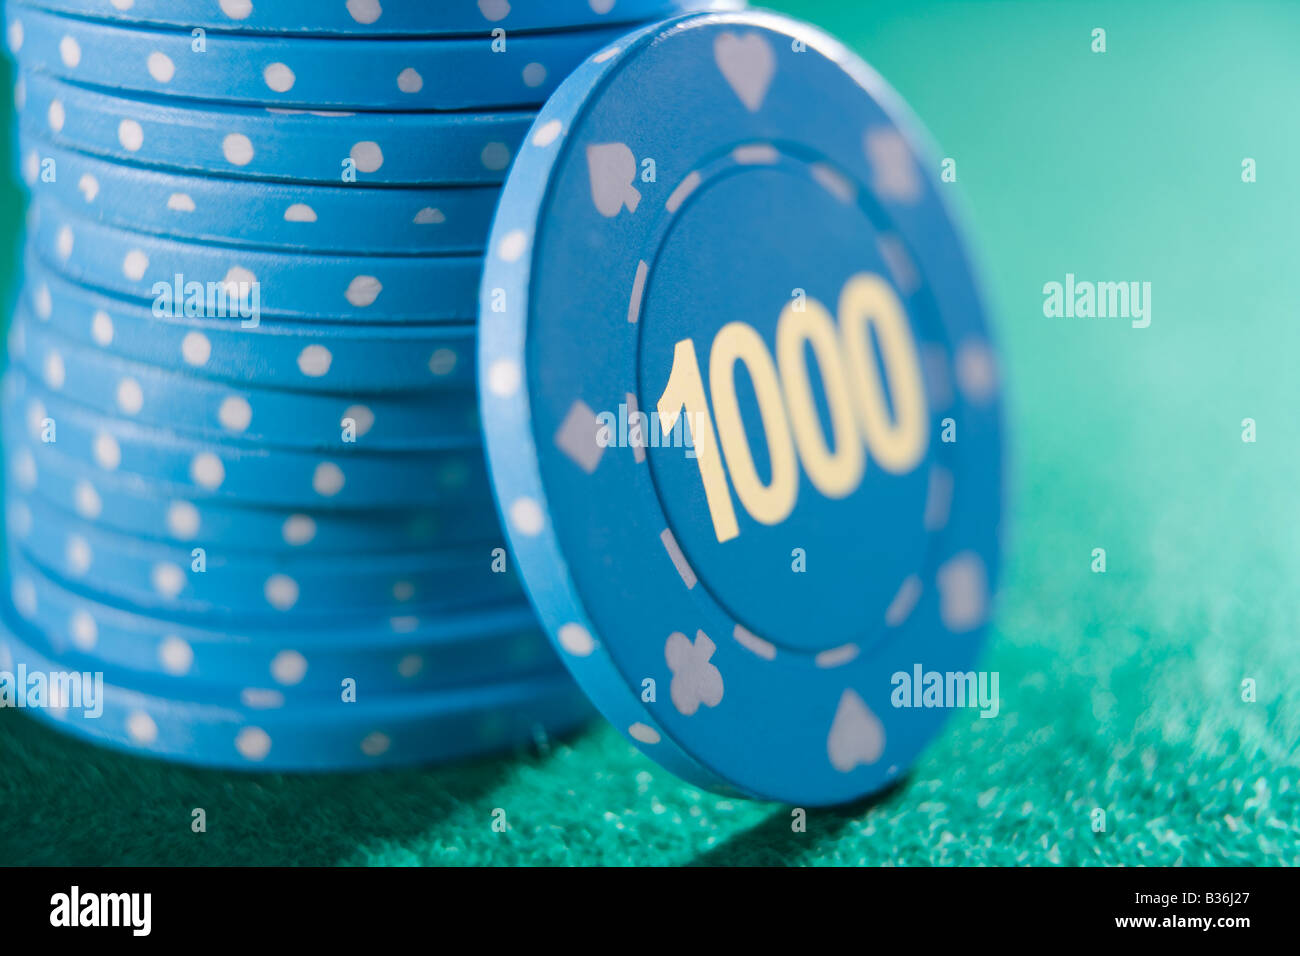 Poker chips piled on a poker table with one thousand chip showing (close up/selective focus) Stock Photo